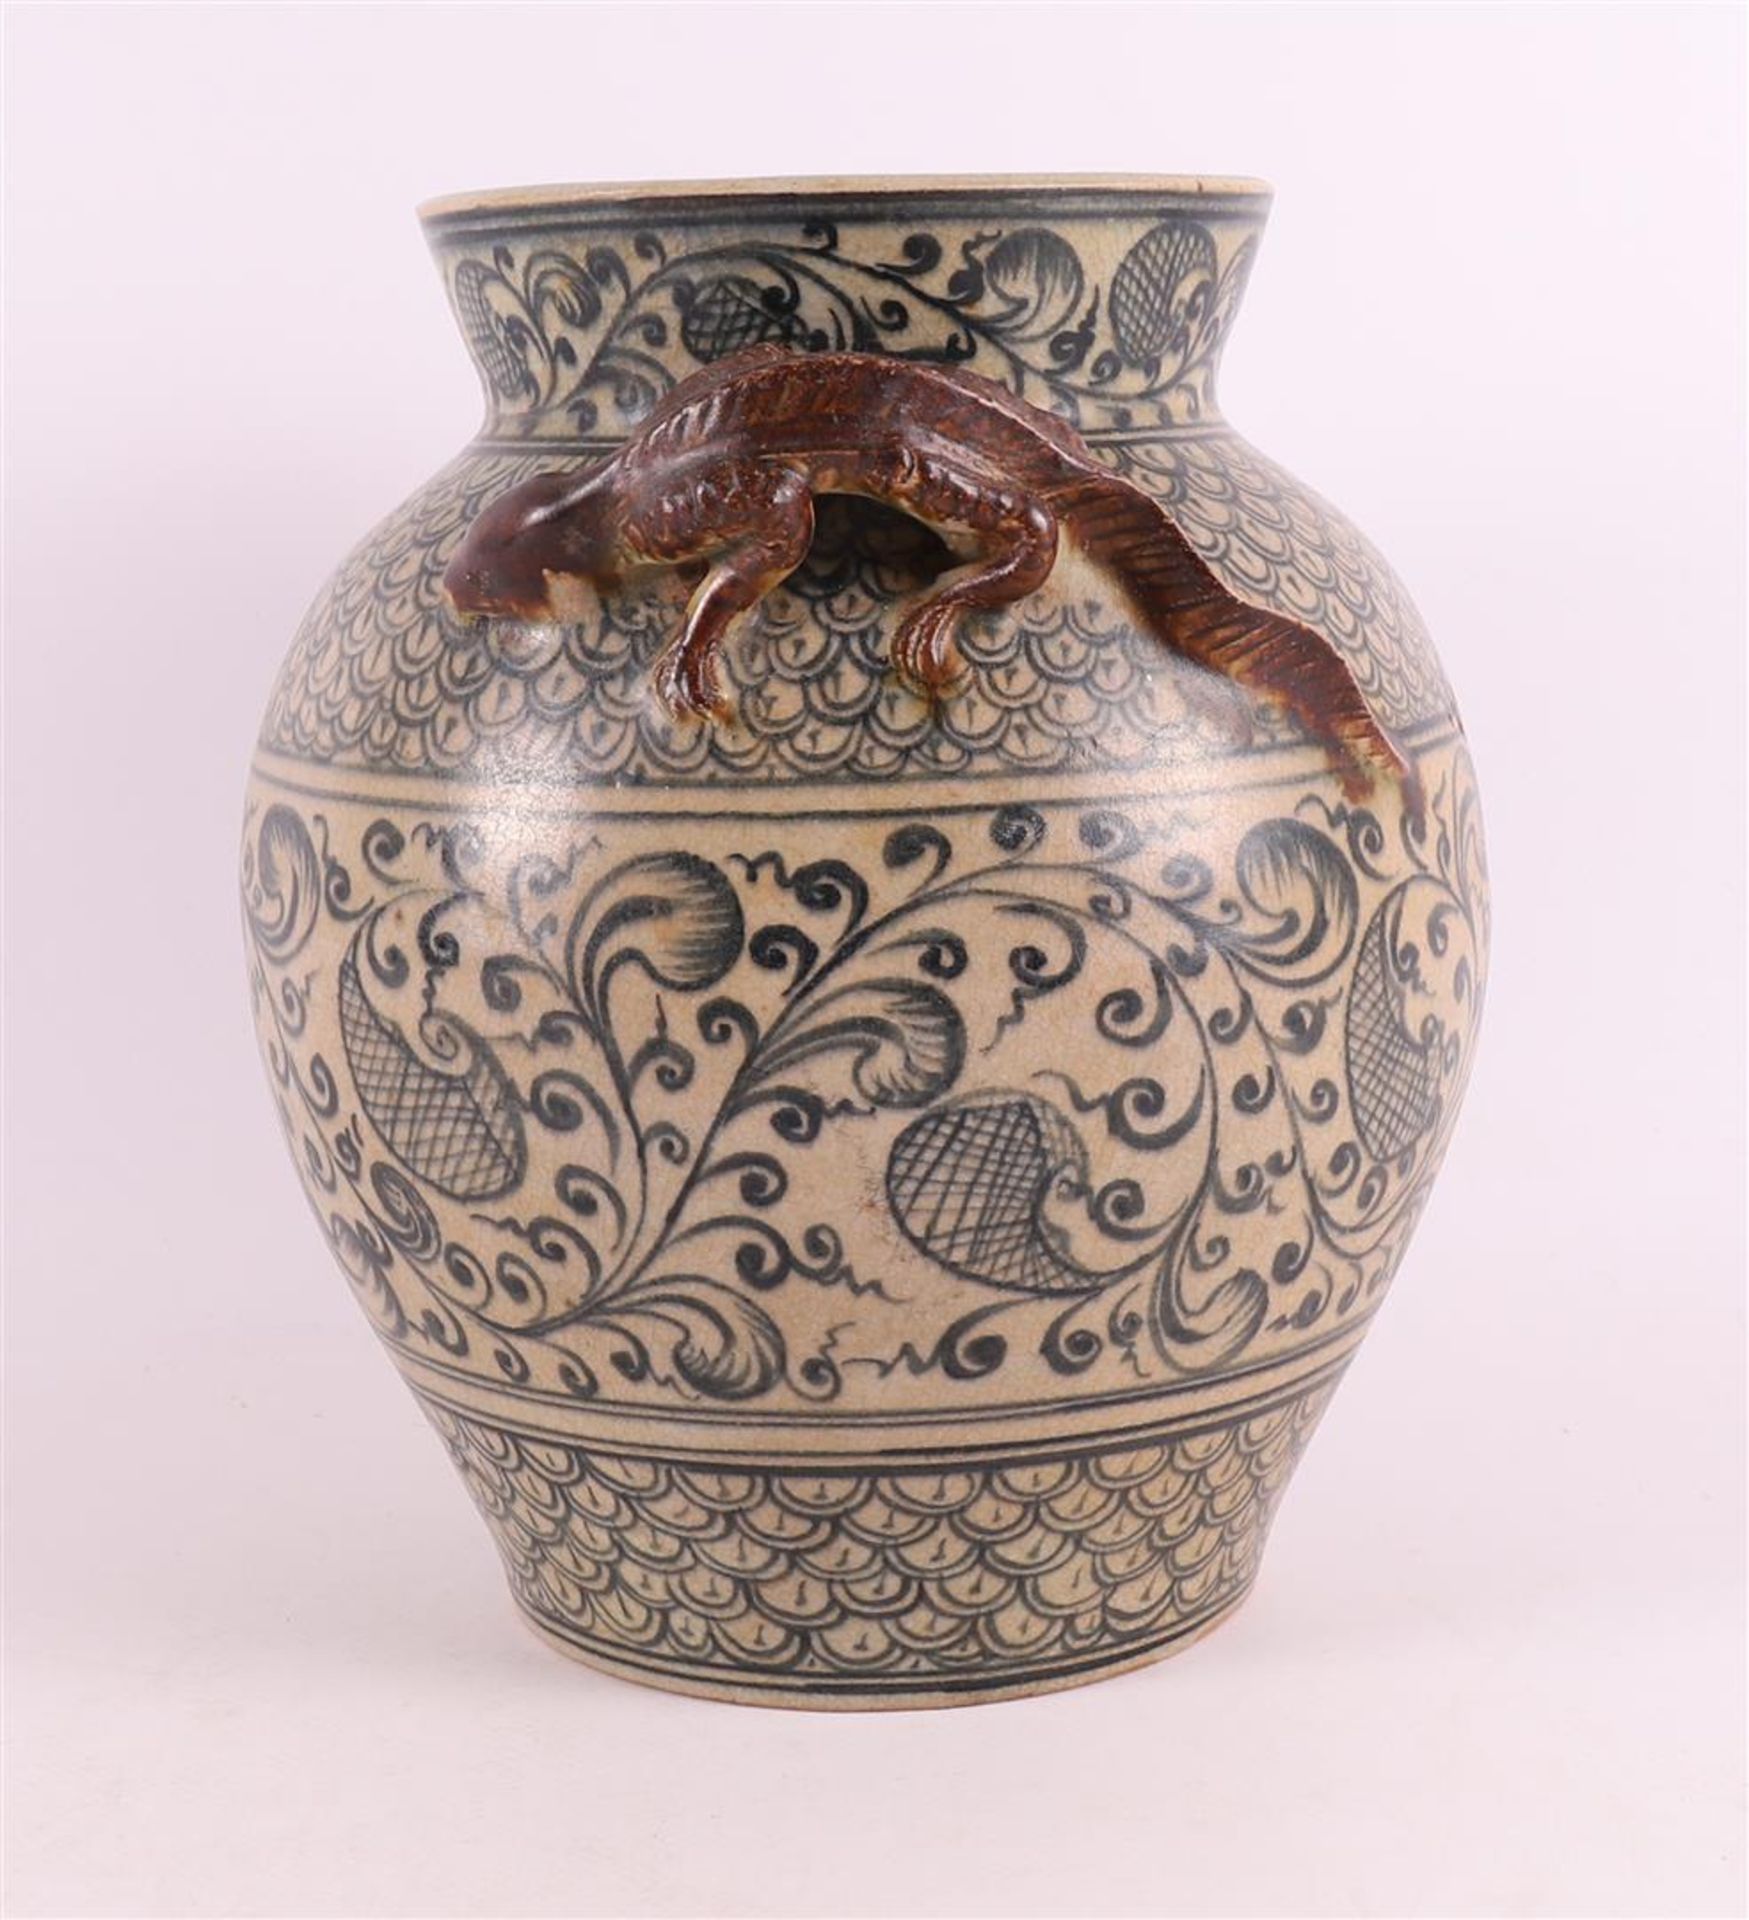 A blue and white stoneware vase with salamanders for ears, 20th C. - Image 4 of 6